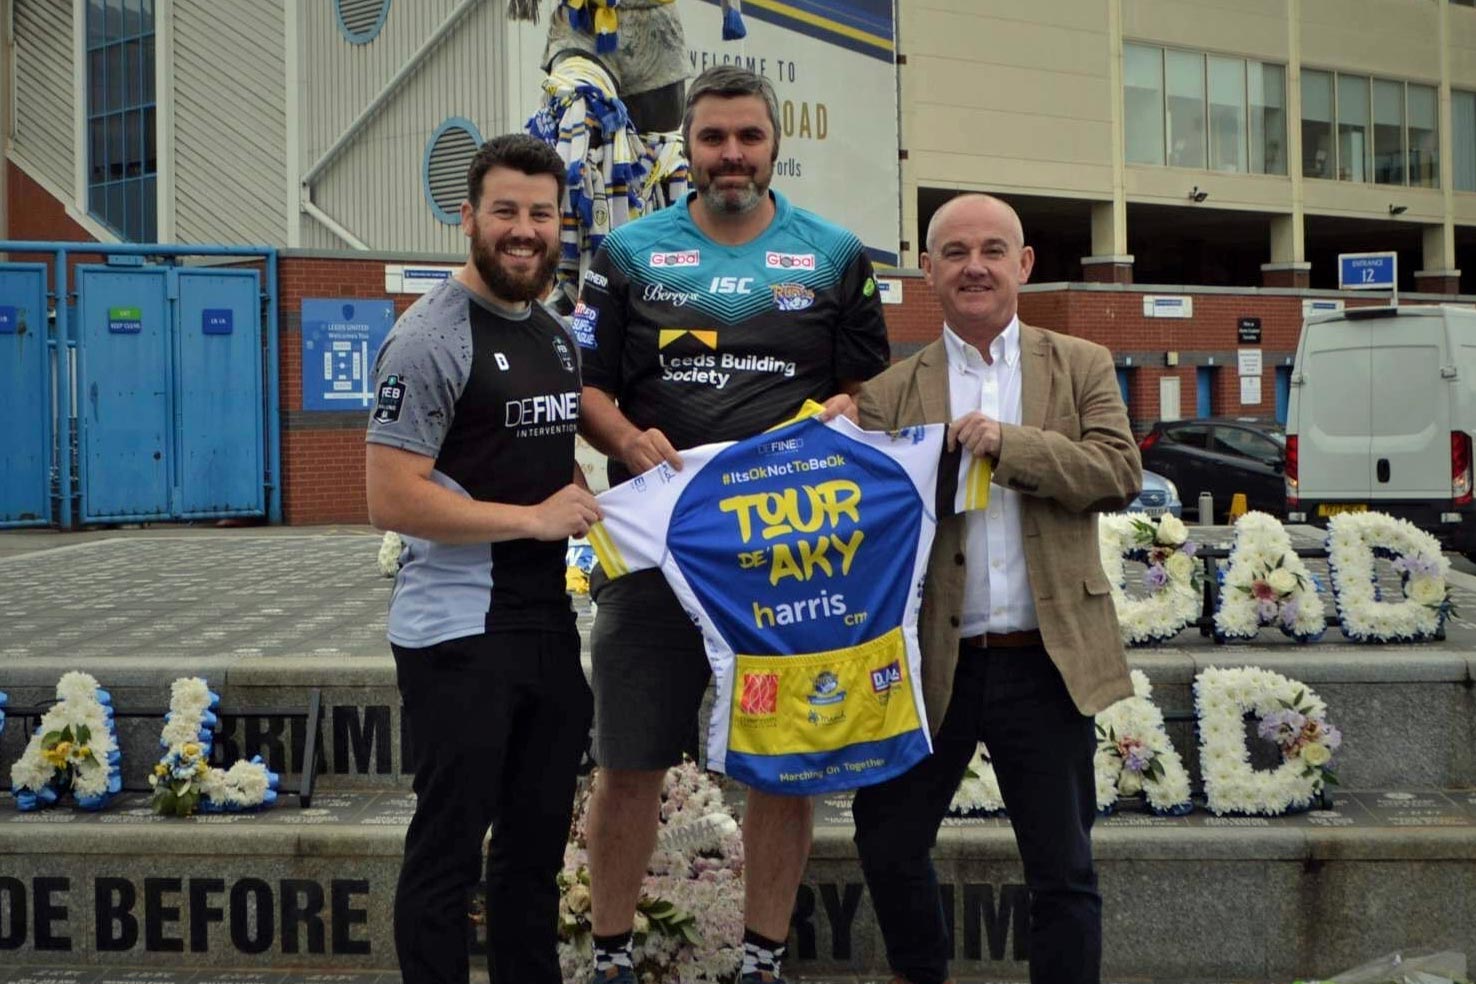 (left to right) Antony Woods of Defined Intervention, the supplier of the cycling jerseys, PC Pierre Olesqui who organised the event and Paul Taylor of sponsors Harris CM, outside Elland Road which is one of the locations the ride will visit